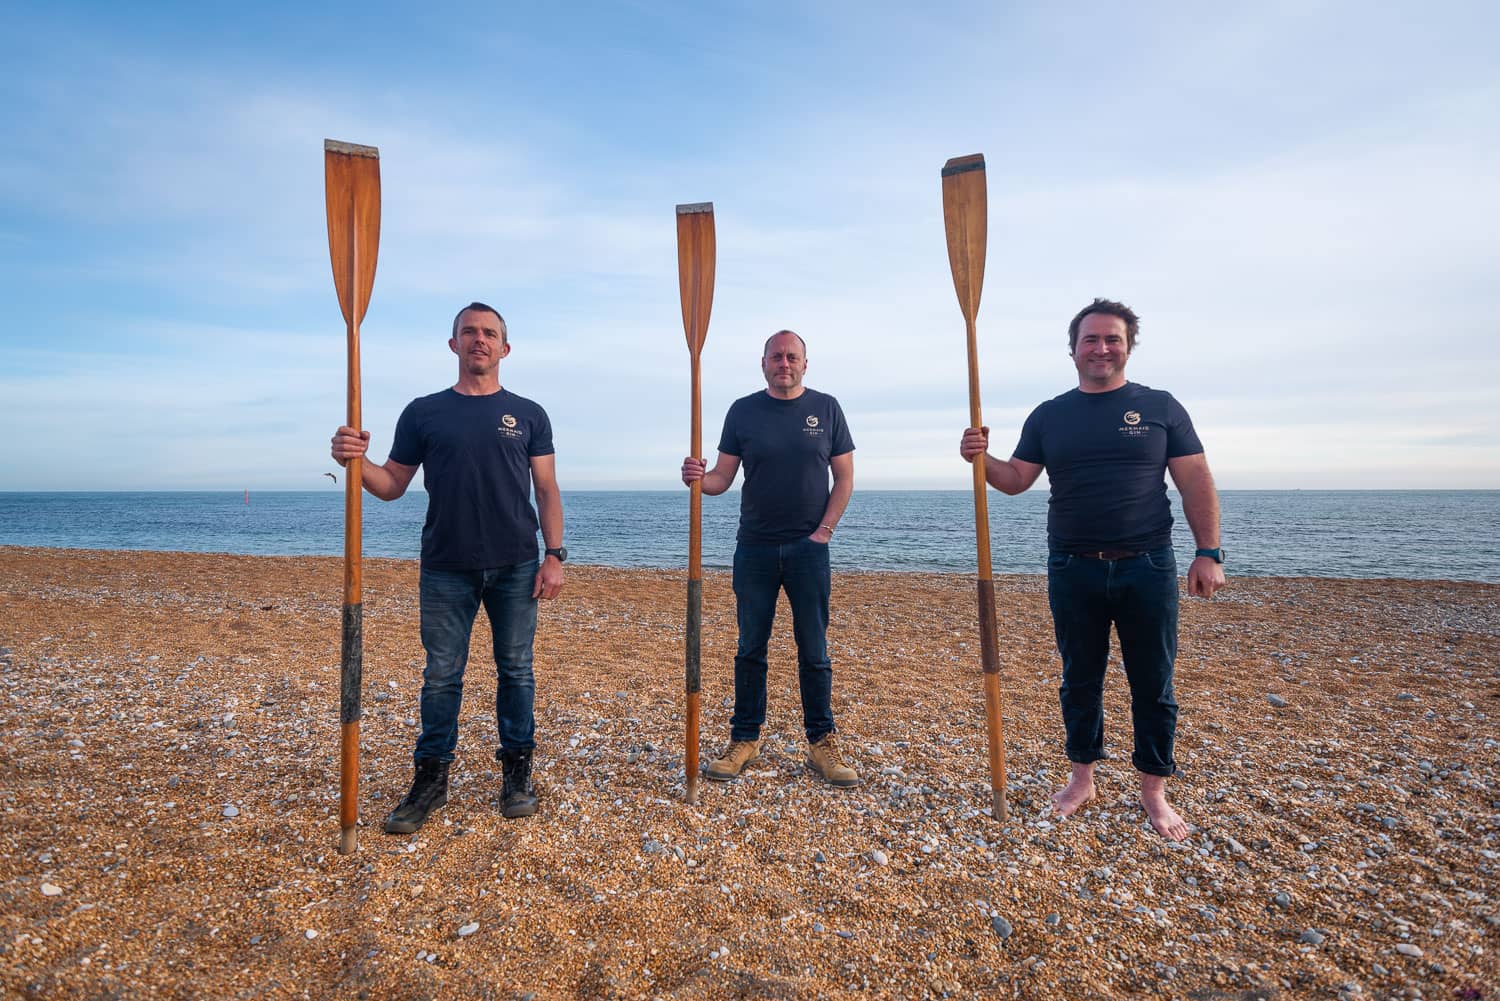 Chris, Xavier and Paul standing on the beach with oars in their hands